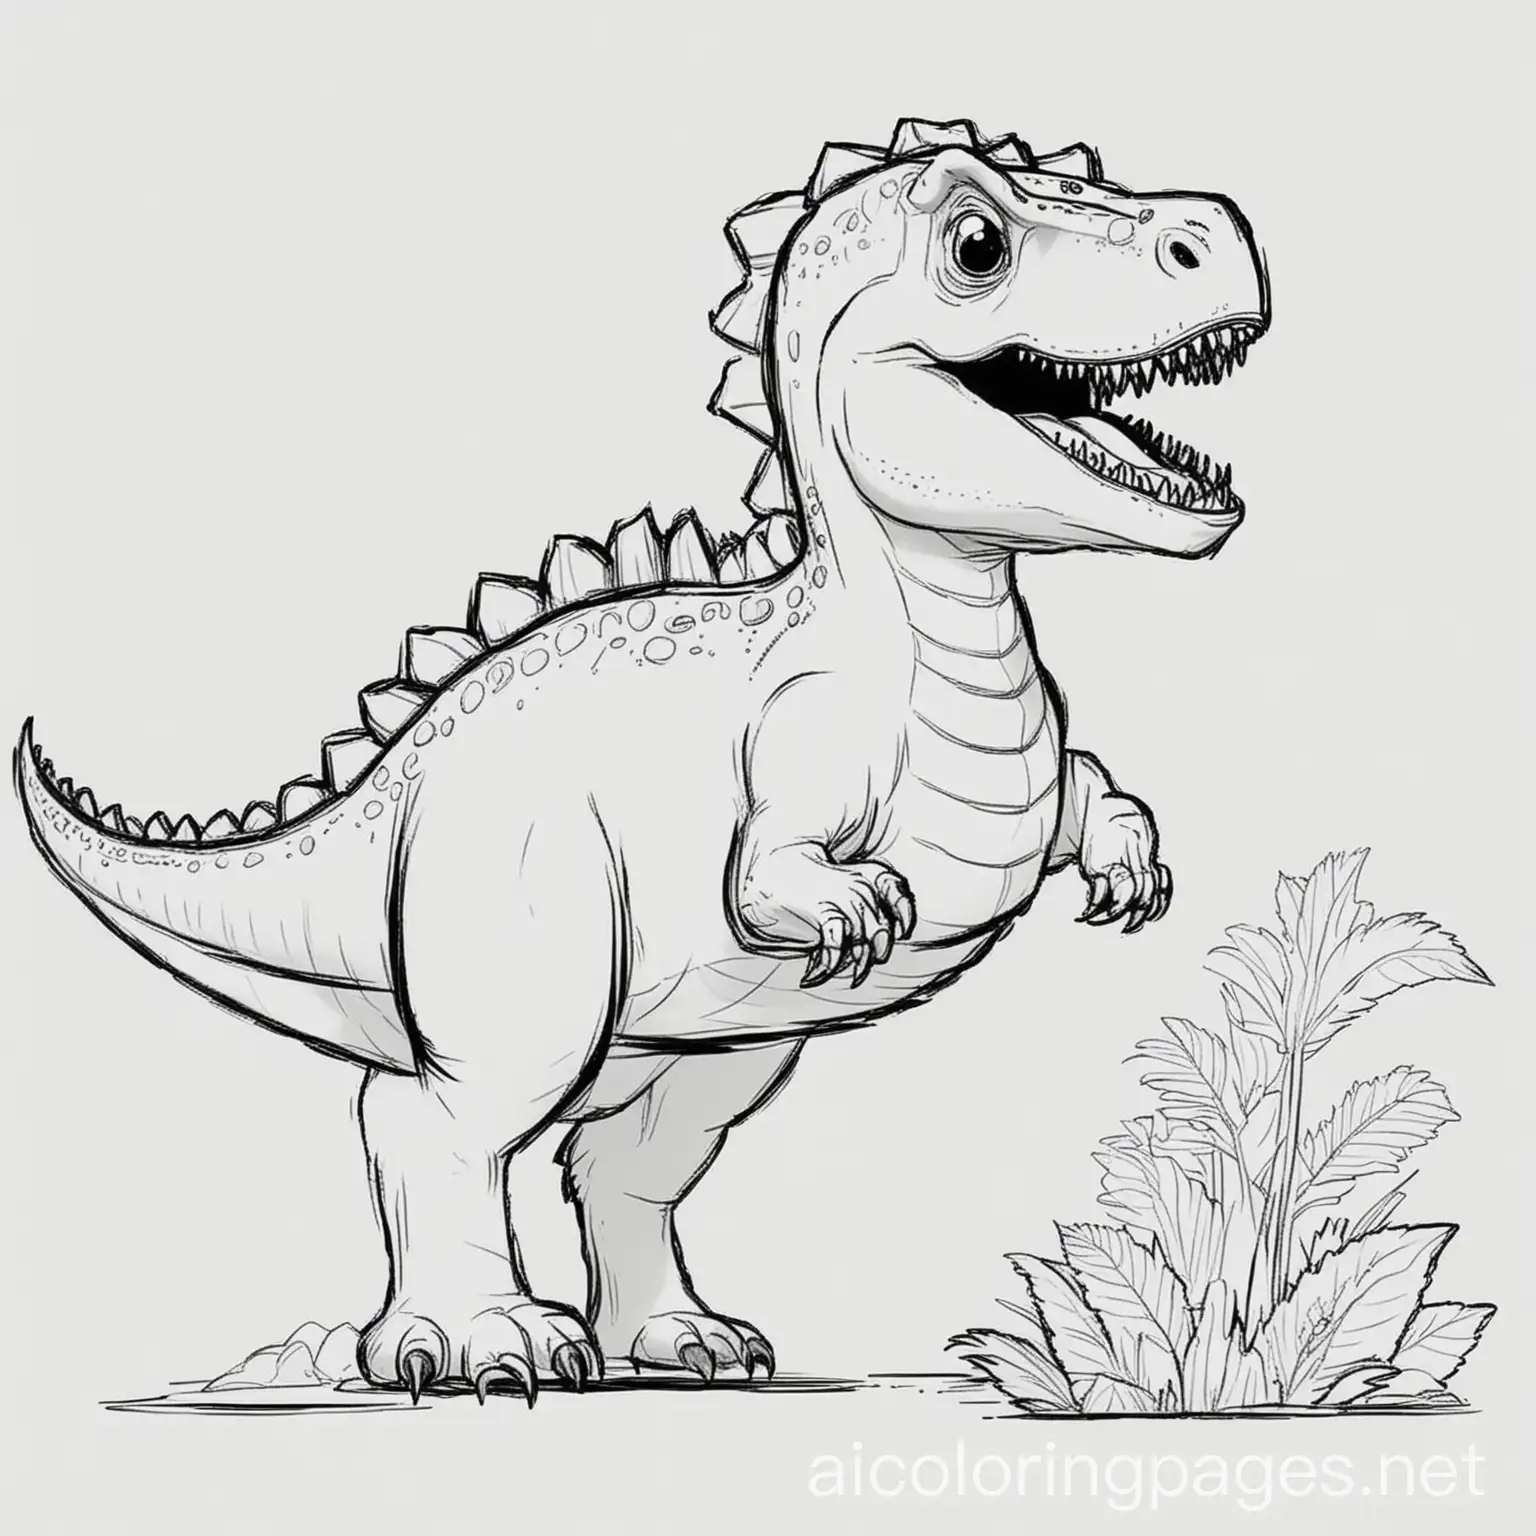 Simple-Dinosaur-Coloring-Page-for-Kids-EasytoColor-Line-Art-on-White-Background